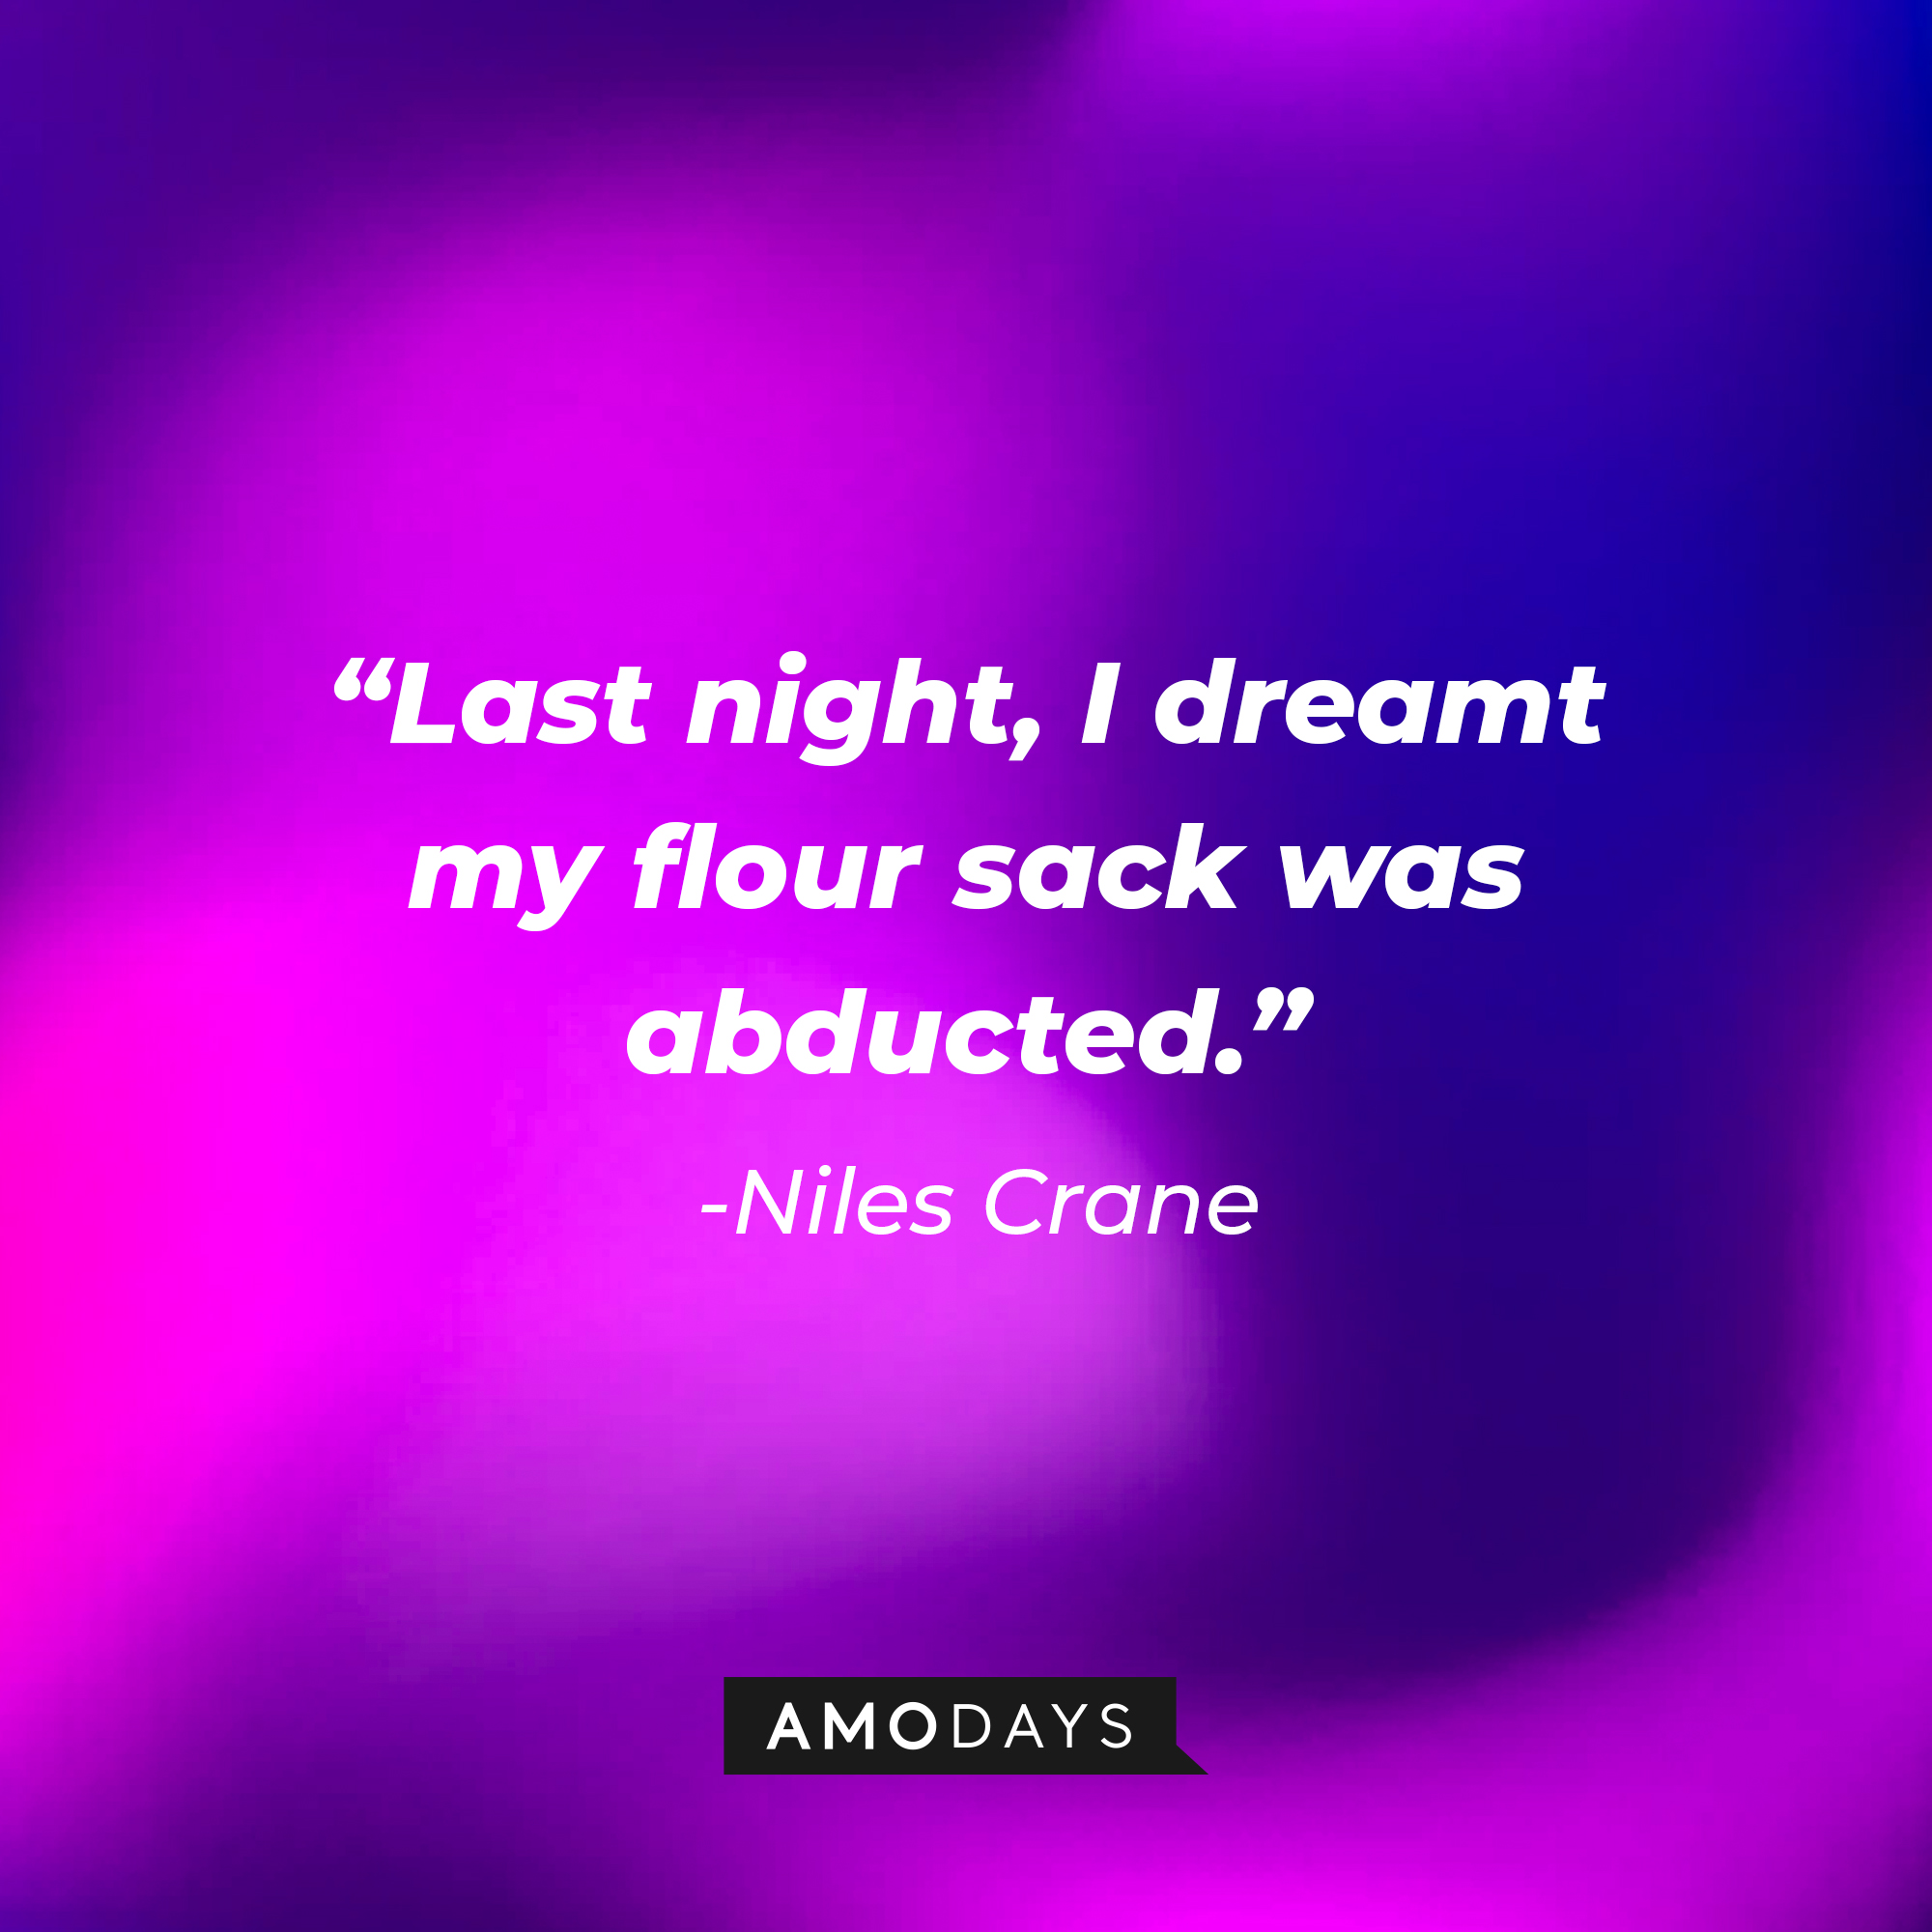 Niles Crane’s quote: “Last night, I dreamt my flour sack was abducted.” | Source: AmoDays